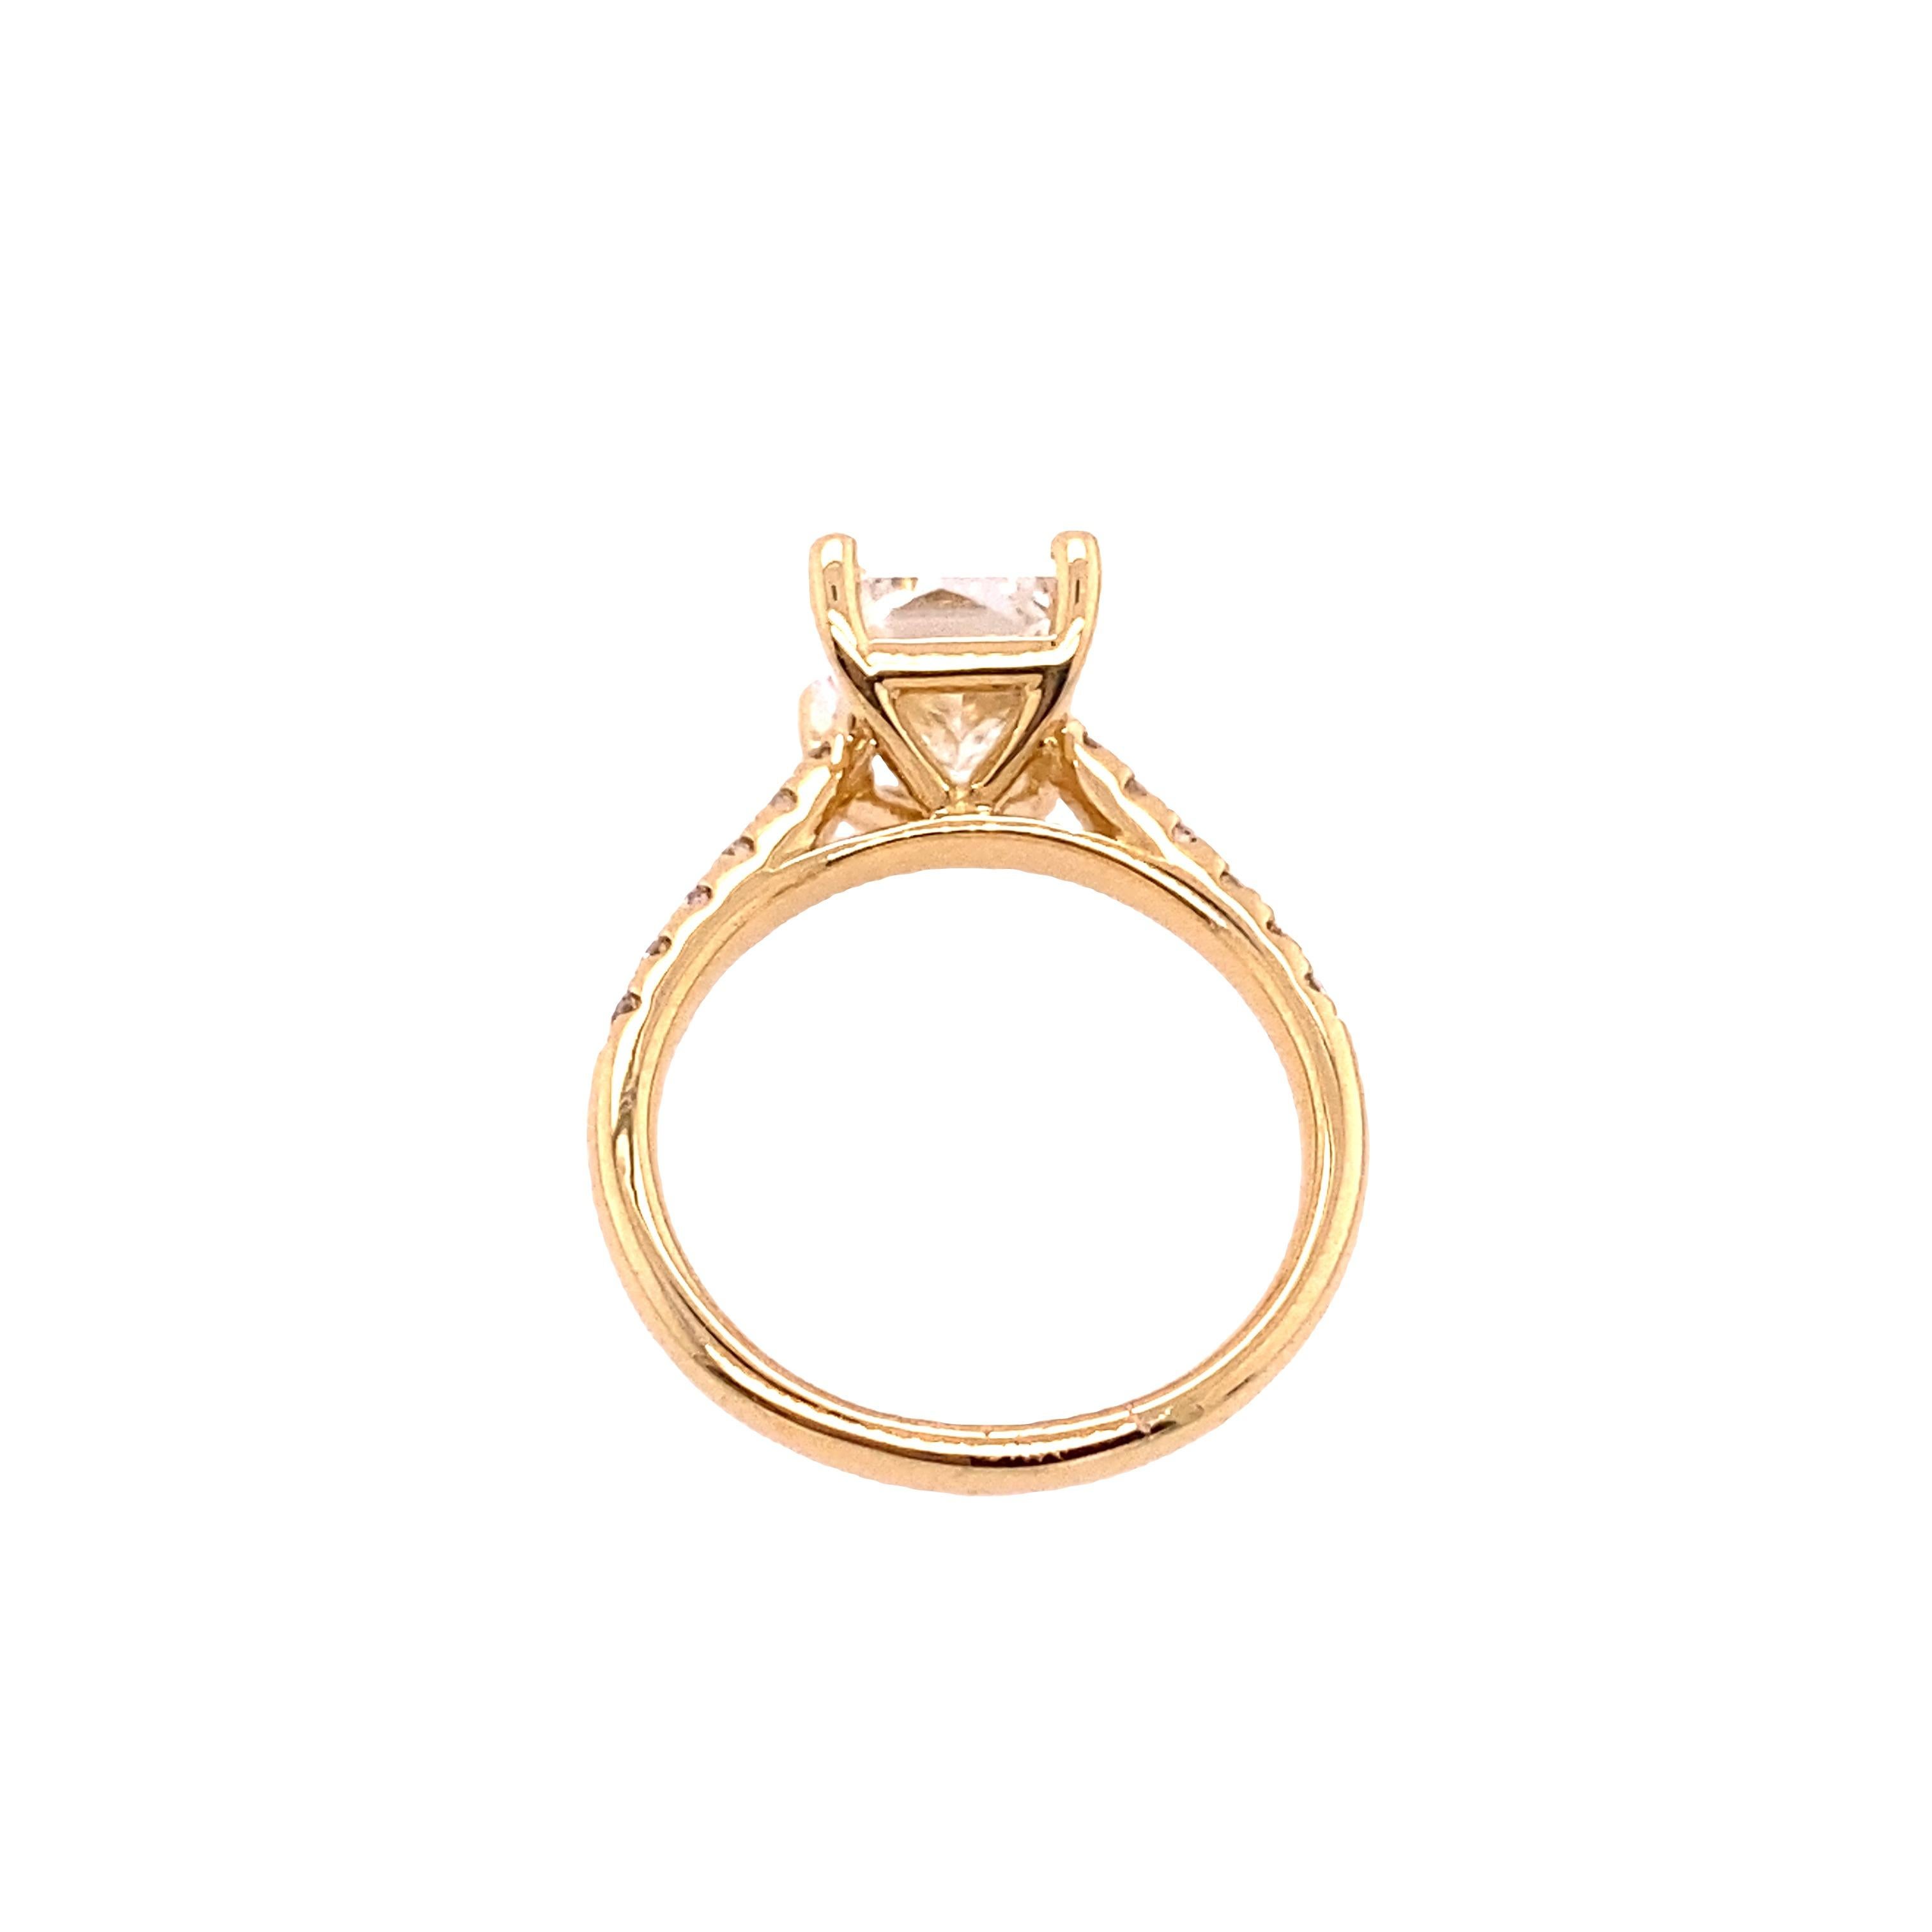 Modern 3.01ct I/VS1 GIA Certified Radiant Cut Natural Diamond, Set In 18ct Yellow Gold For Sale